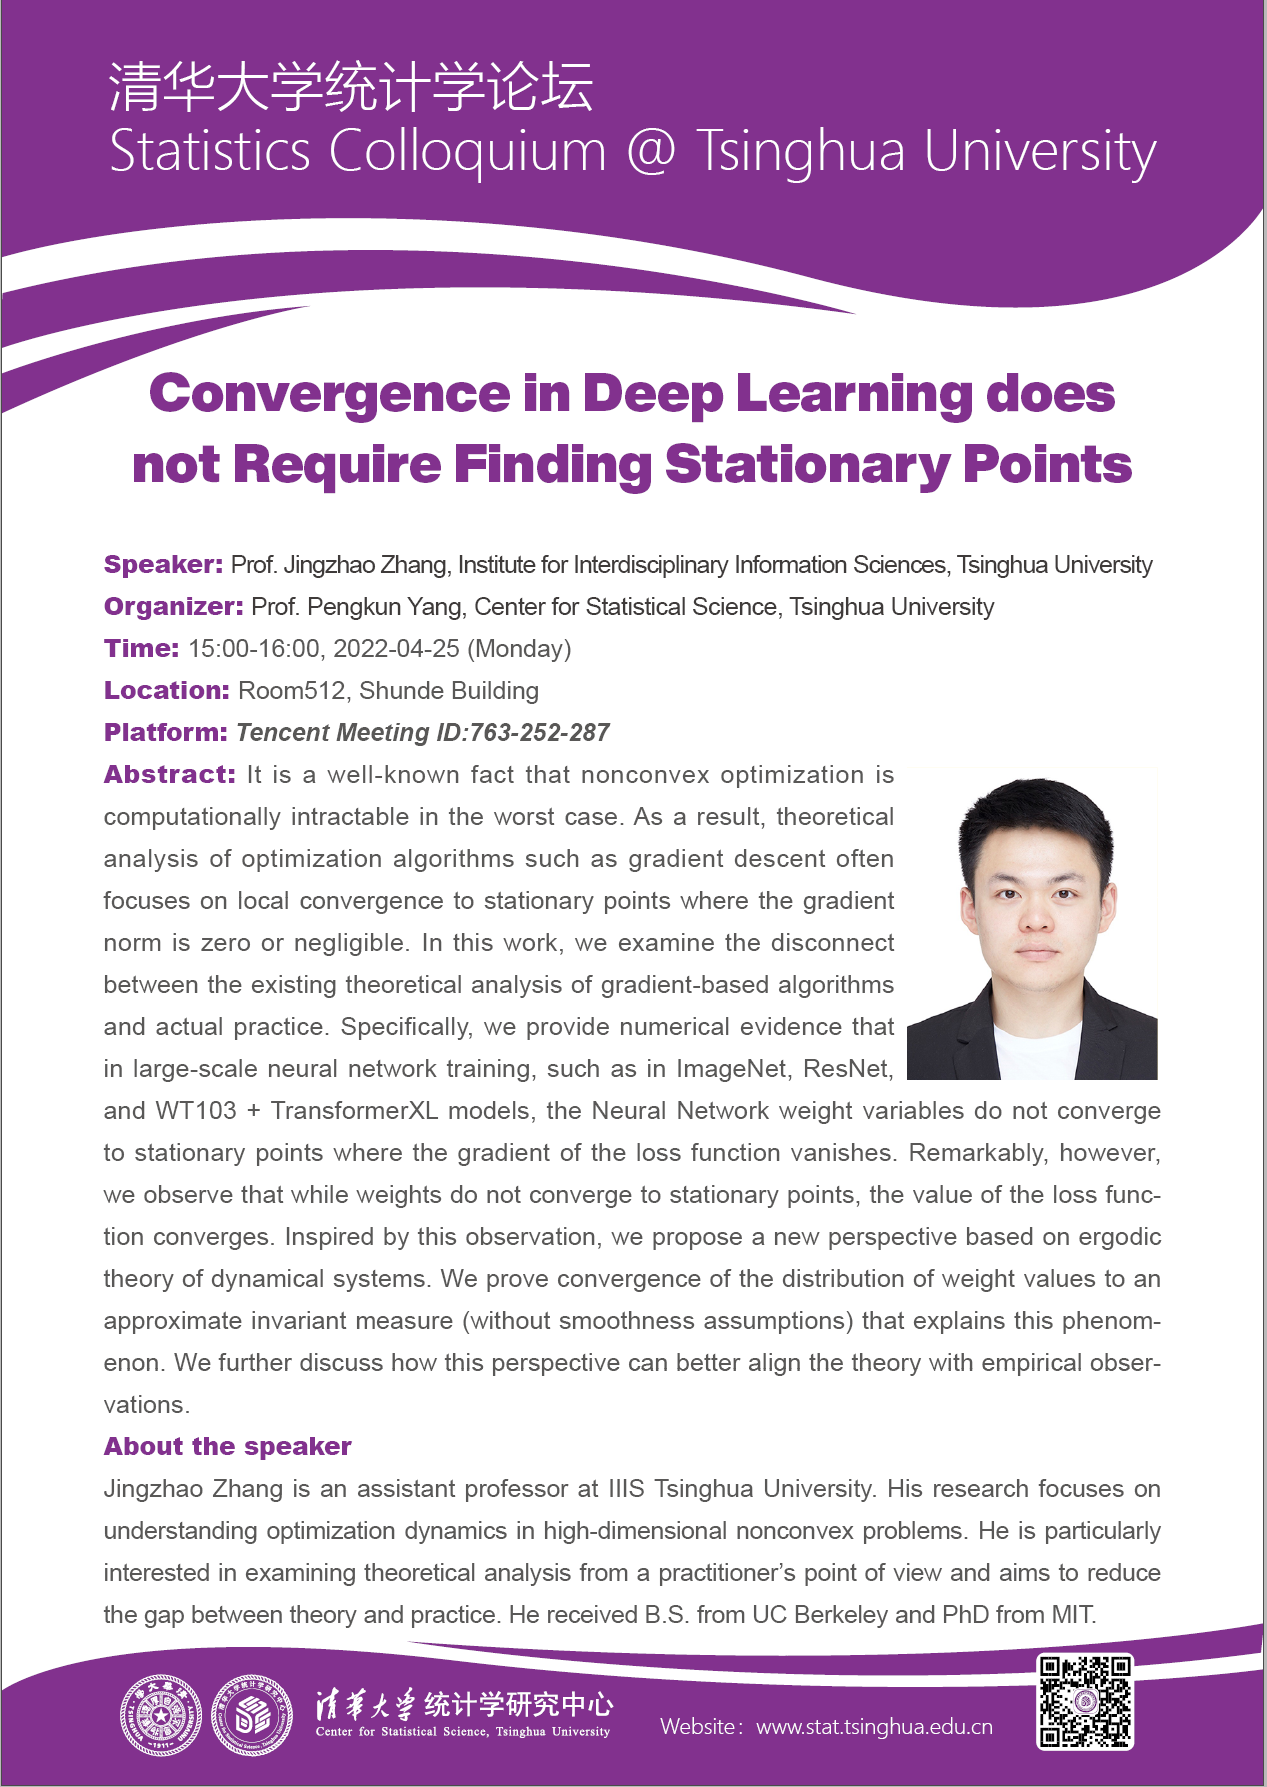 Convergence in Deep Learning does not Require Finding Stationary Points